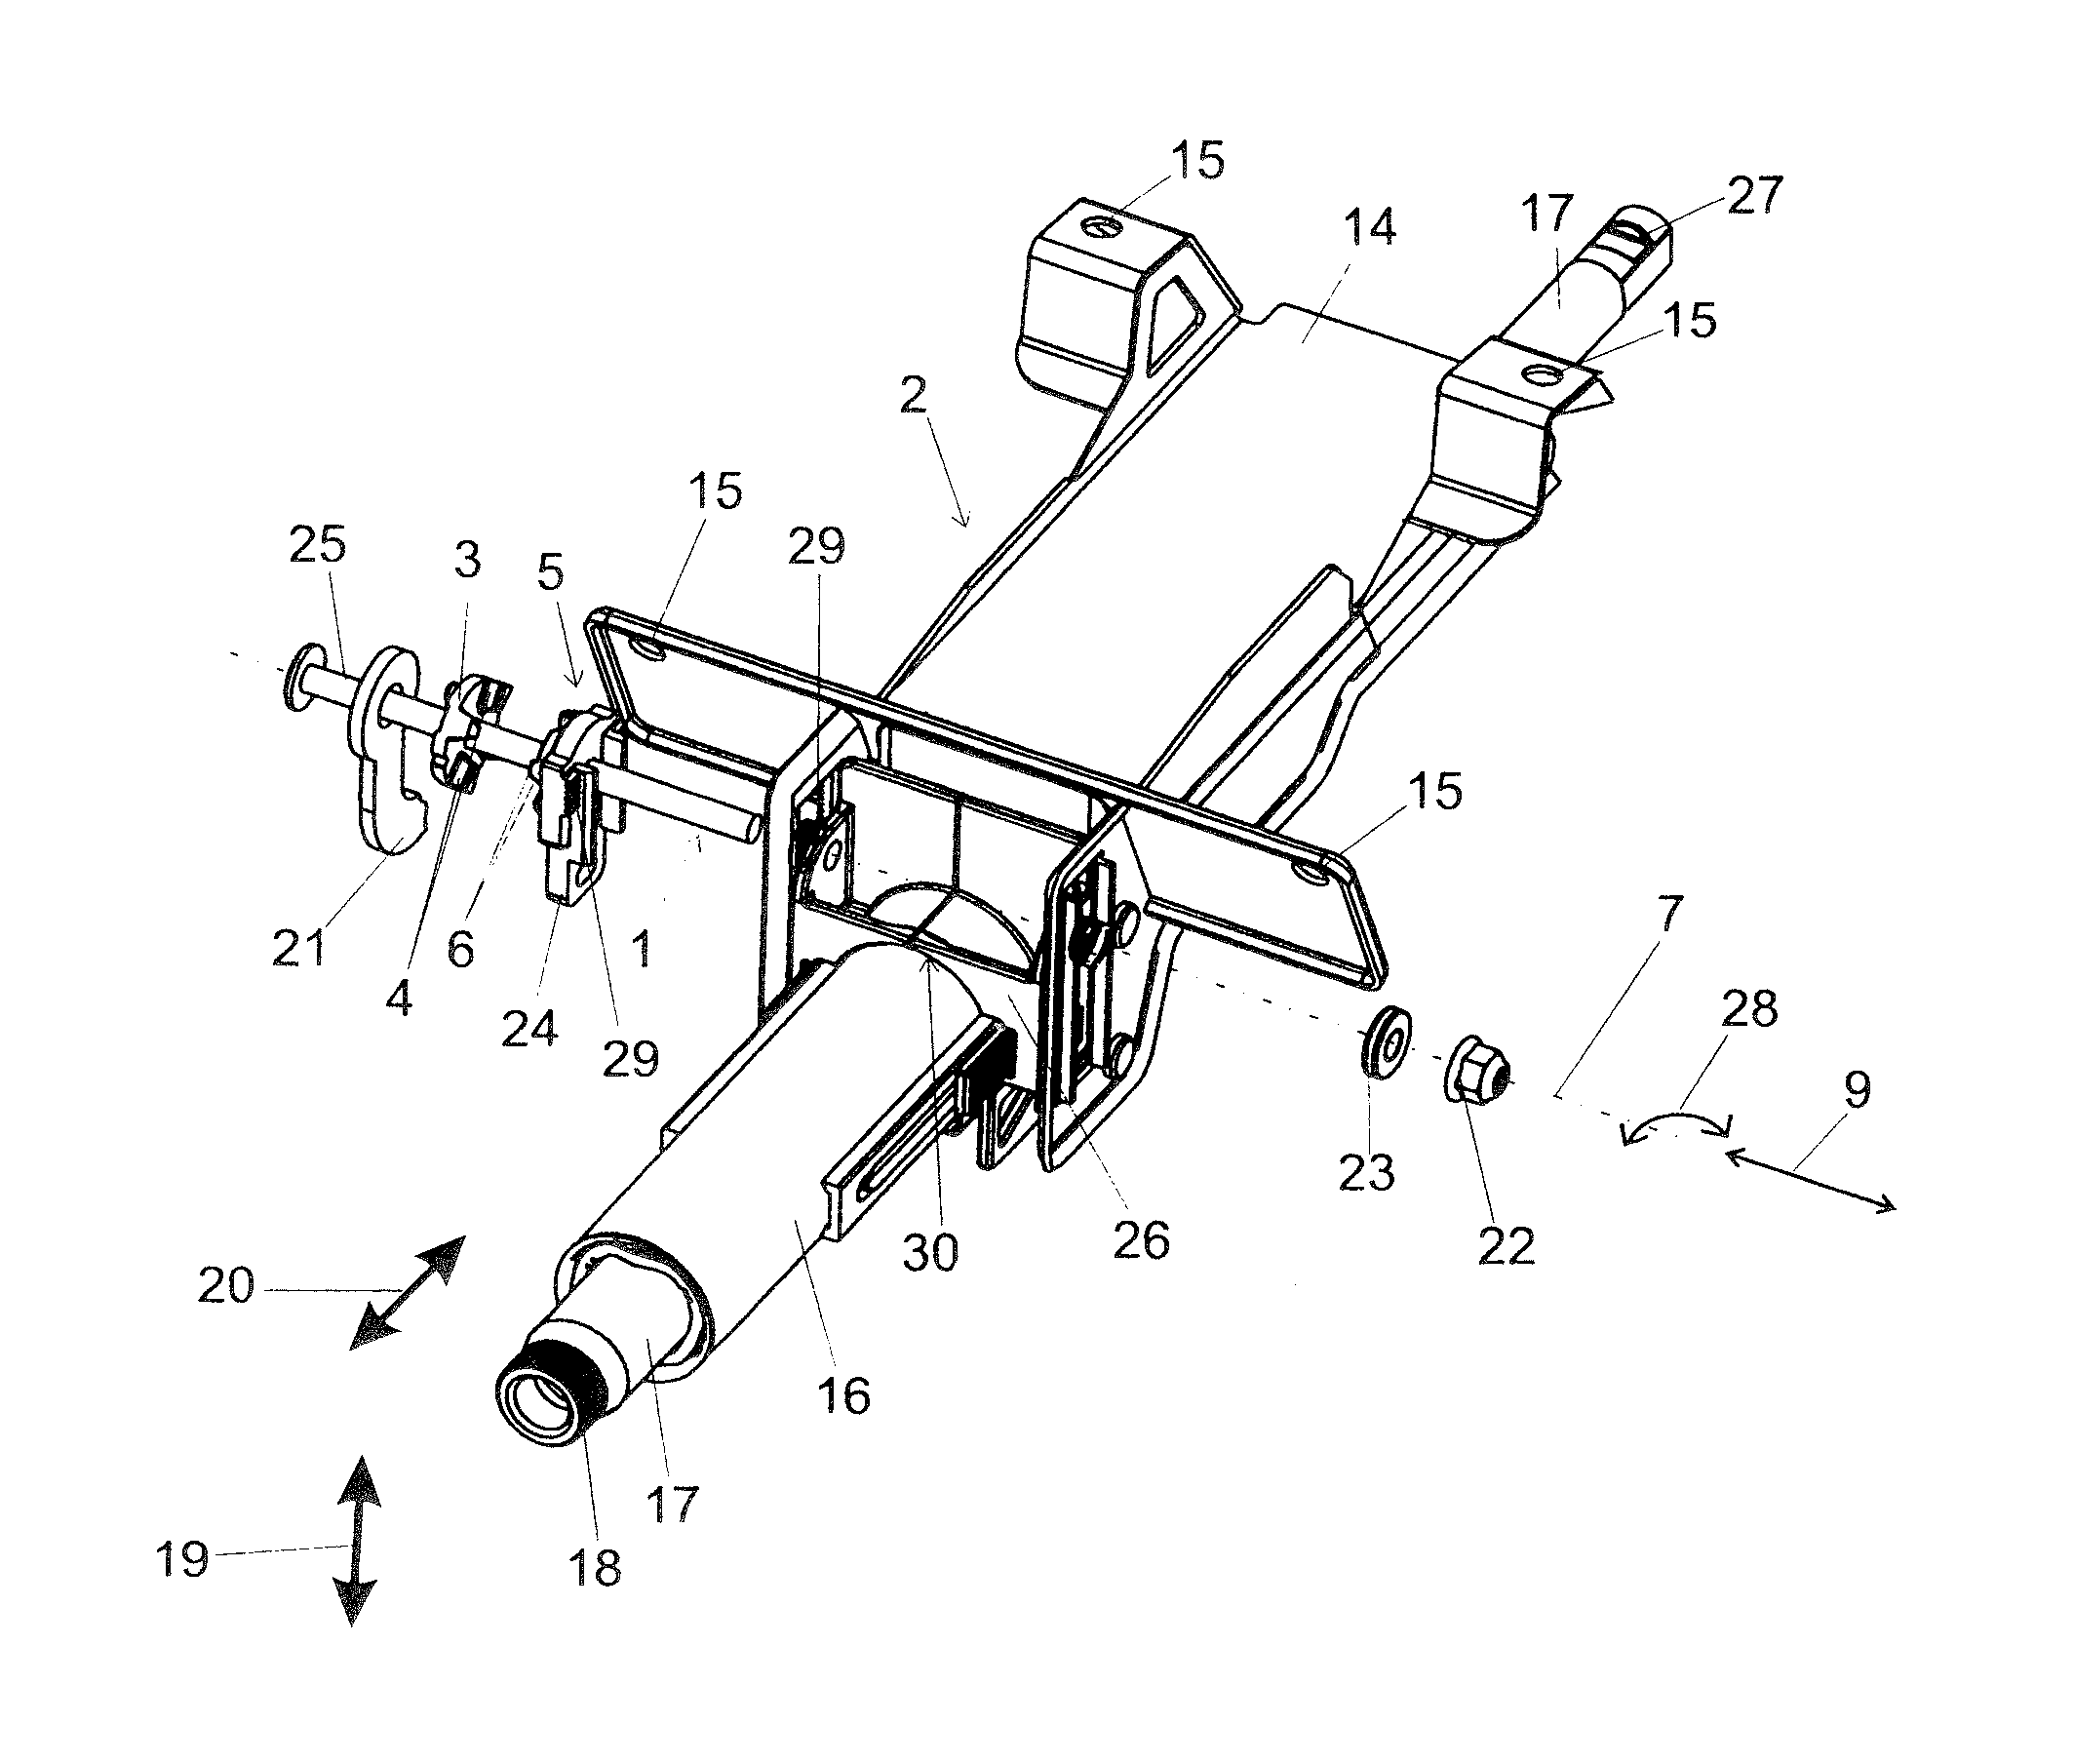 Locking device for an adjustable steering column